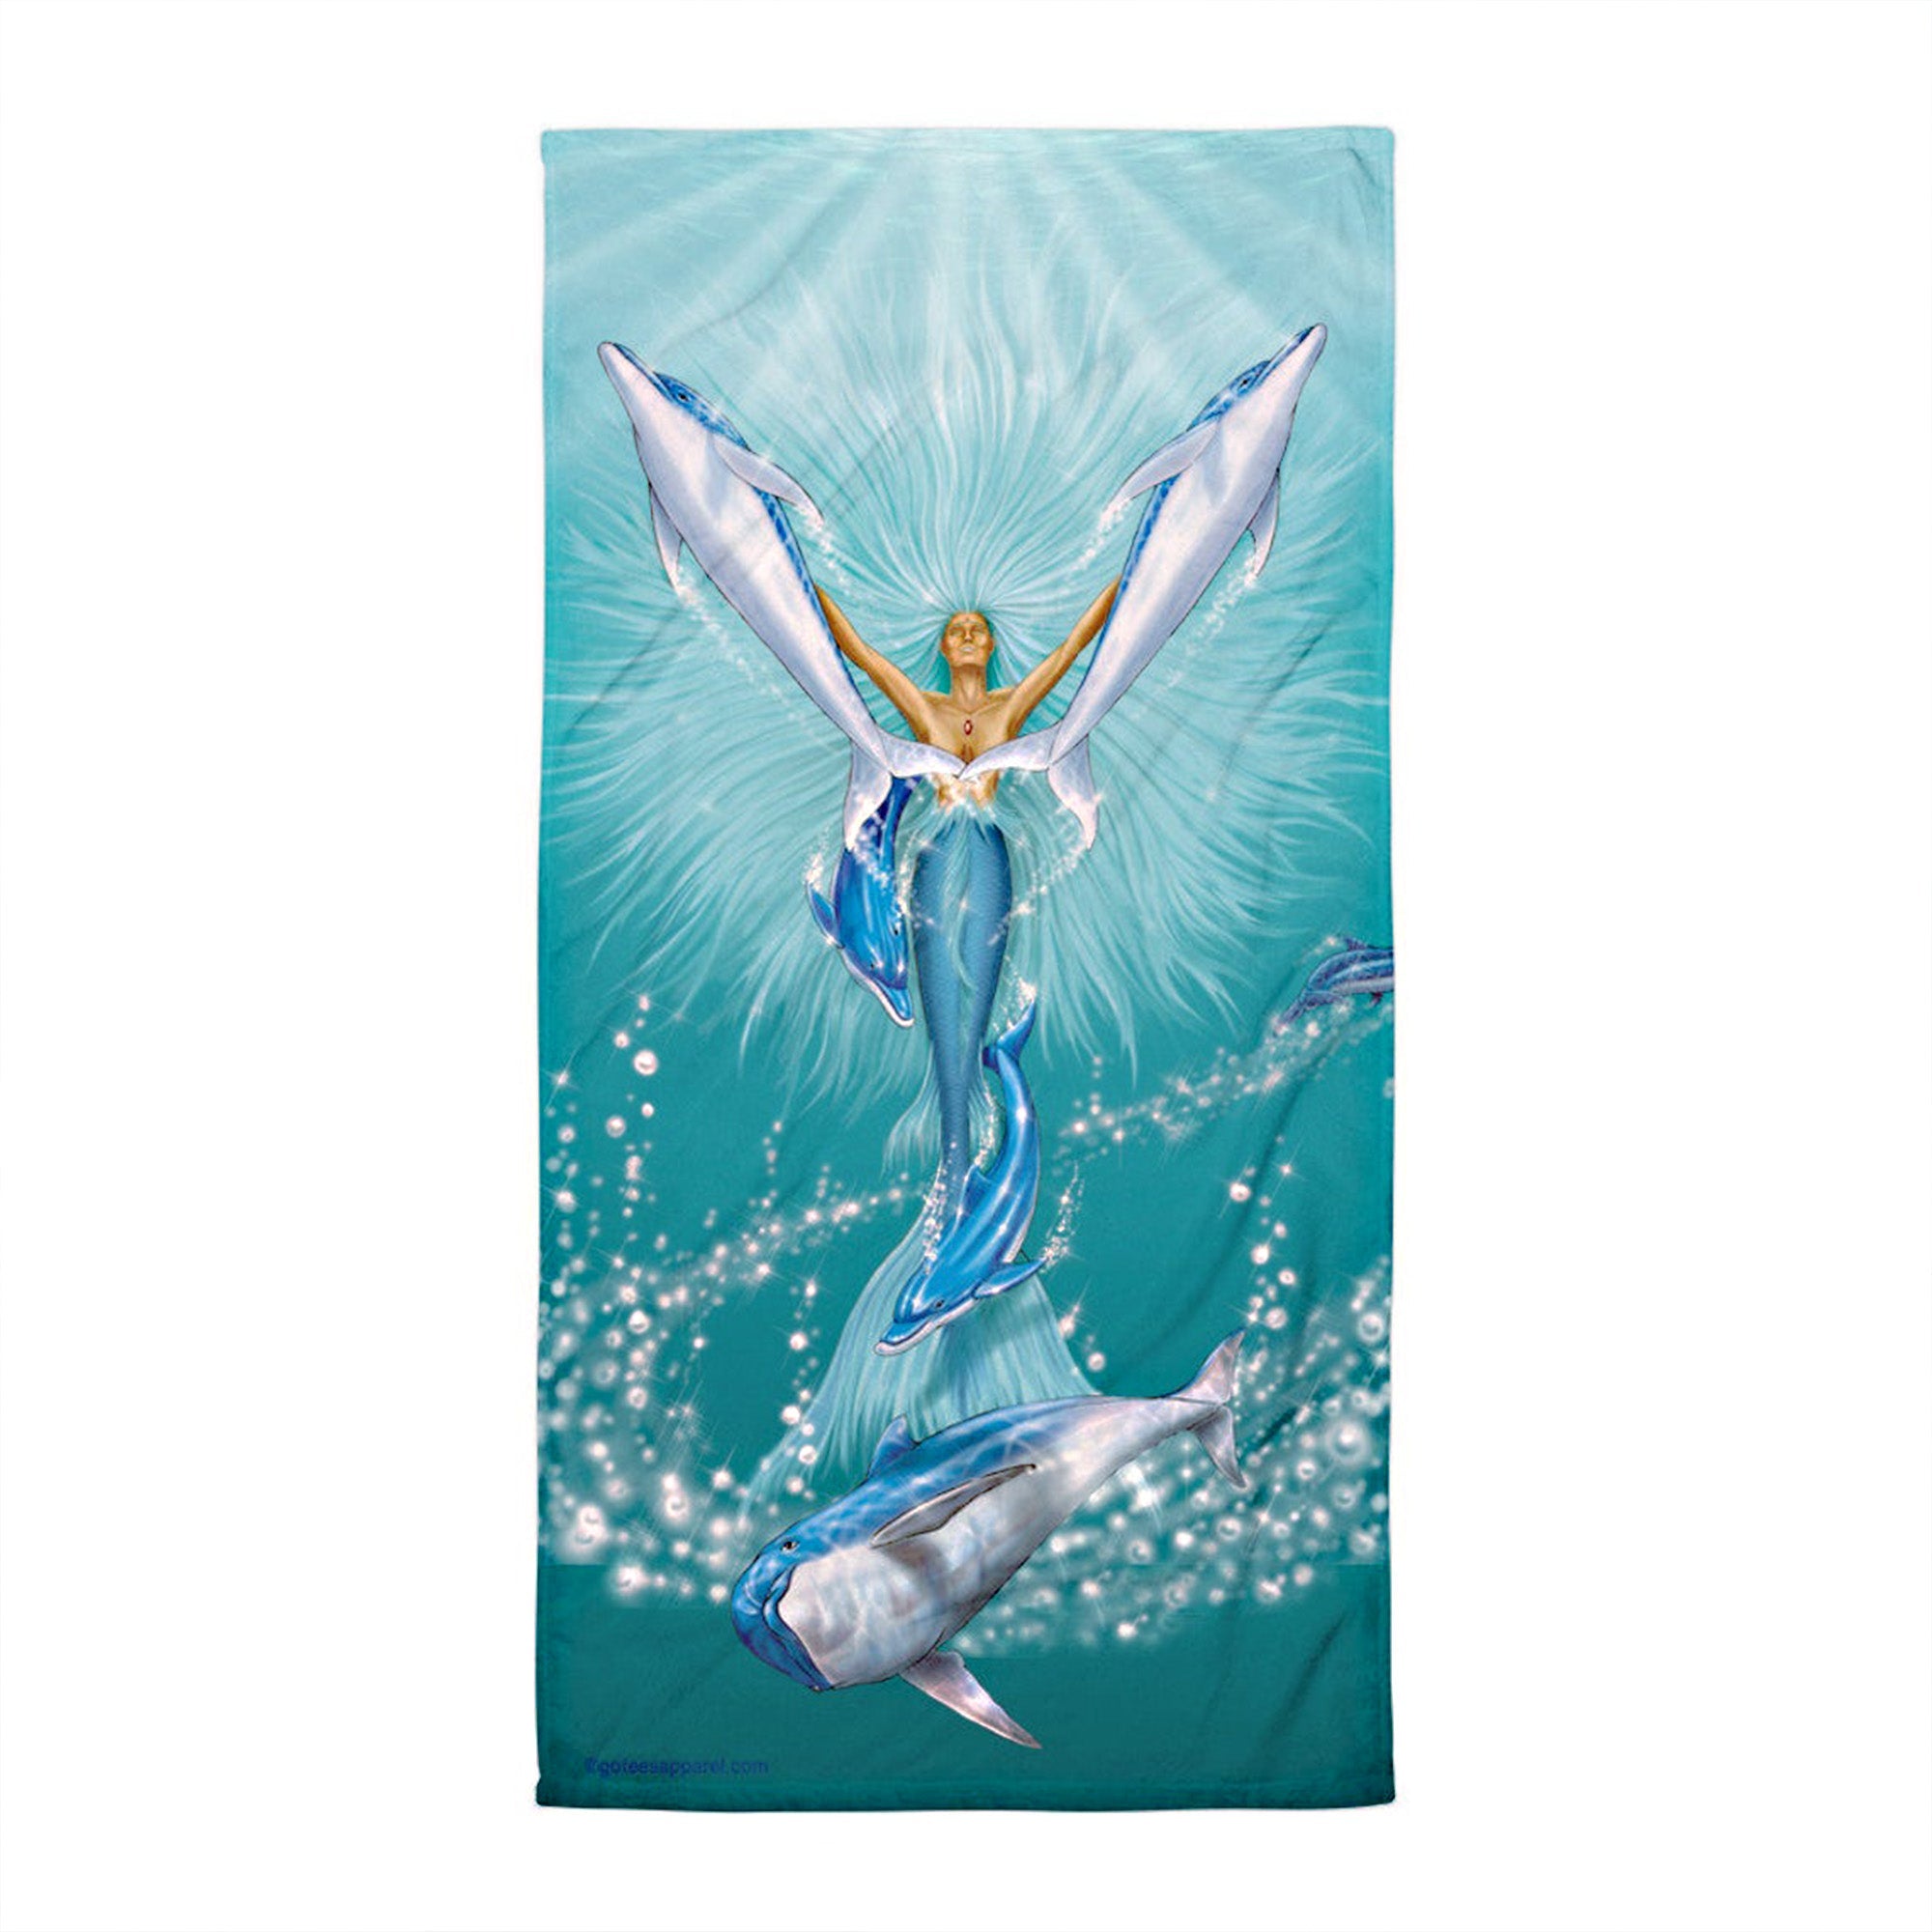 Mermaid And Dolphins Beach Towel, Travel Shower Towel, Camping Towel